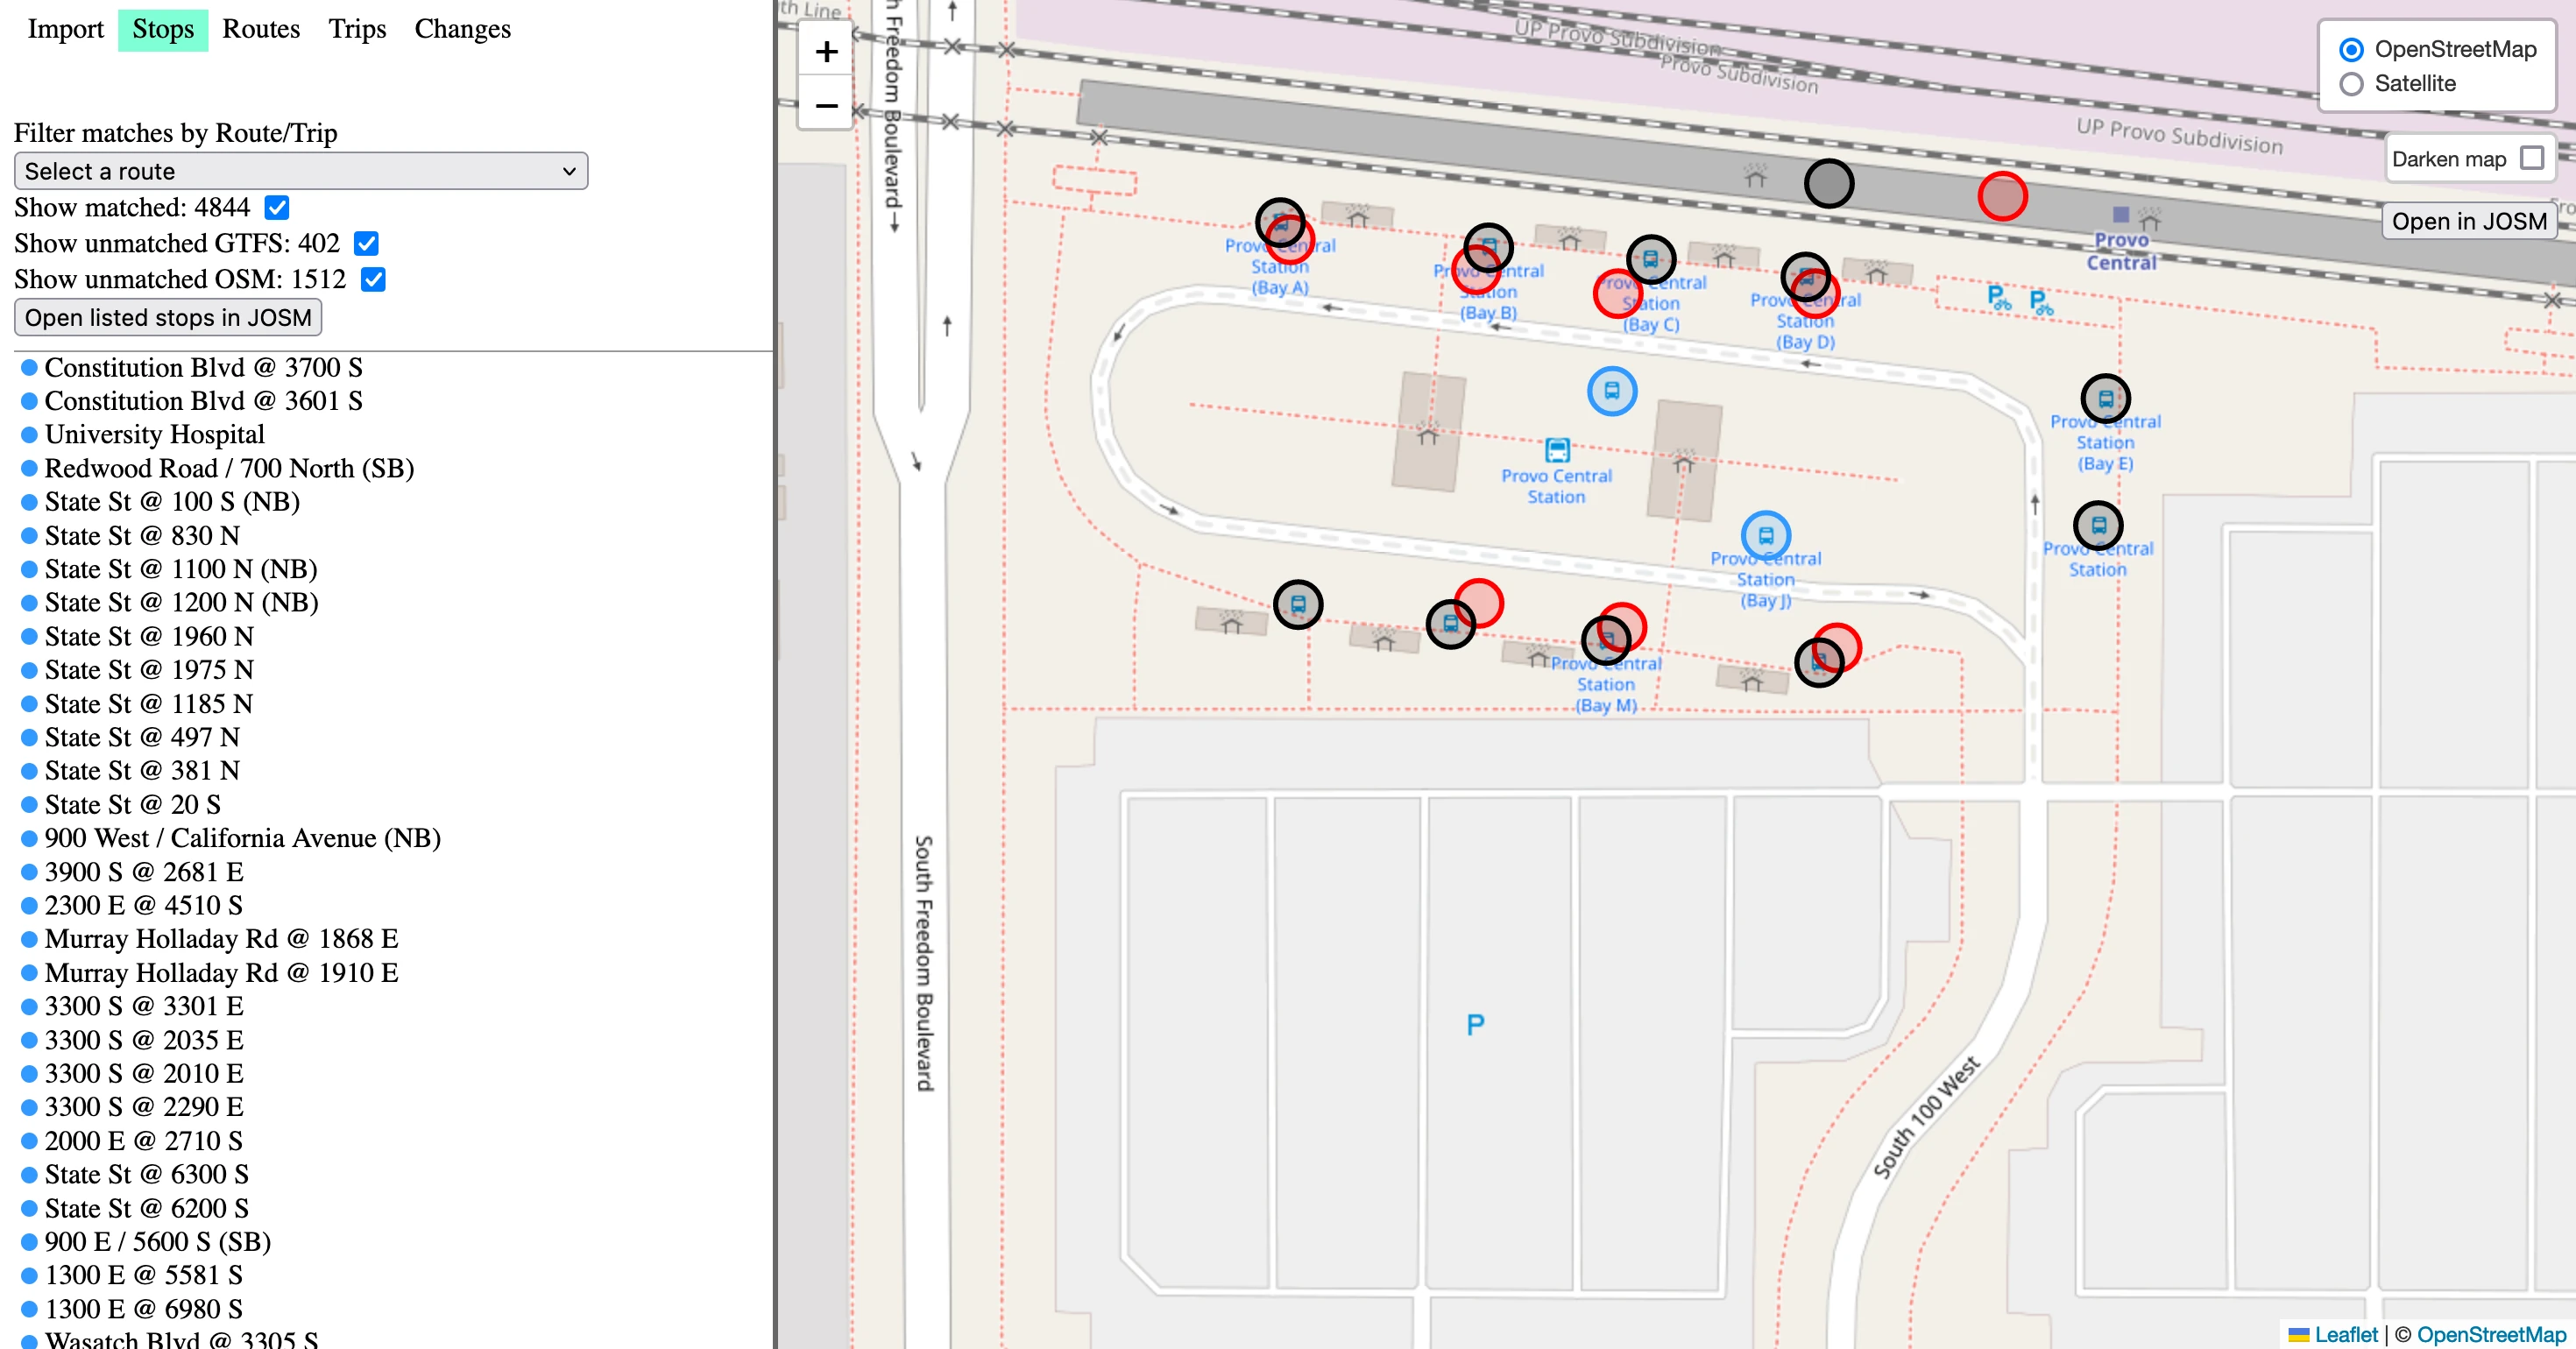 The OSM editing app. The “Stops” navigation option is selected. On the map, there are black dots on top of bus stops visible in the actual map texture. Most of these black dots have nearby red circles. There are a couple of blue dots on top of bus stops. The text in the left app bar reads: “Filter matches by Route/Trip” then a dropdown select box reading “Select a route”. Then, “Show matched: 4844” with a checked checkbox. Then, “Show unmatched GTFS: 402” with a checked checkbox. Then, “Show unmatched OSM: 1512” with a checked checkbox. Then a button, “Open listed stops in JOSM”. Then, a list of bus stops: “Constitution Blvd @ 3700 S” with a blue circle, “Constitution Blvd @ 3601 S” with a blue circle, etc.